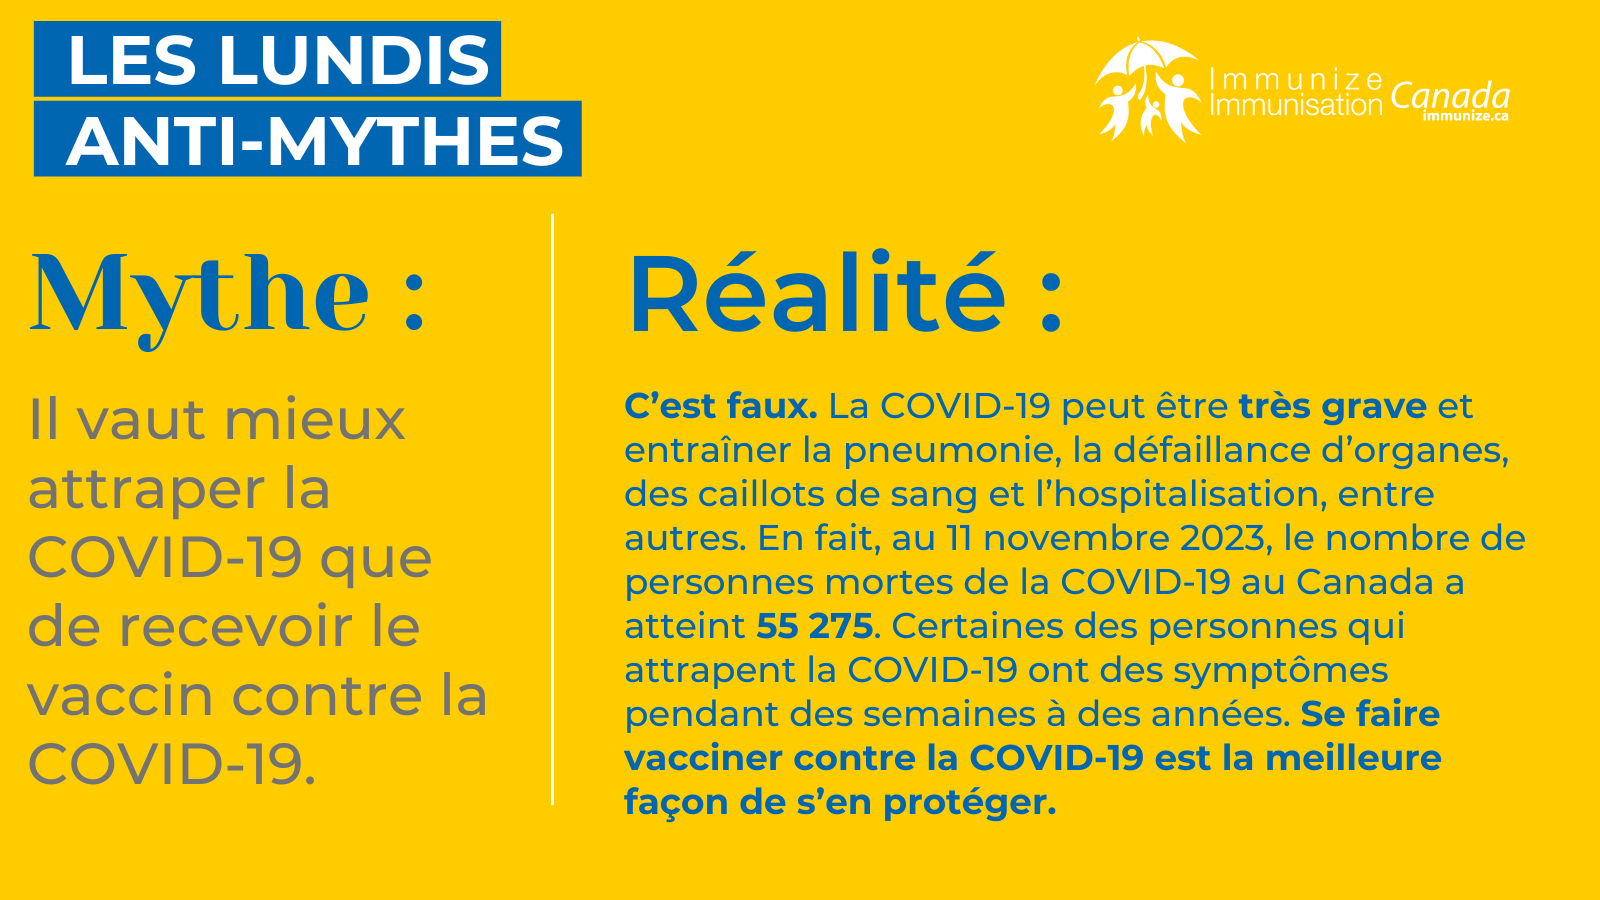 Les lundis anti-mythes - COVID-19 - image 2 pour Twitter/X